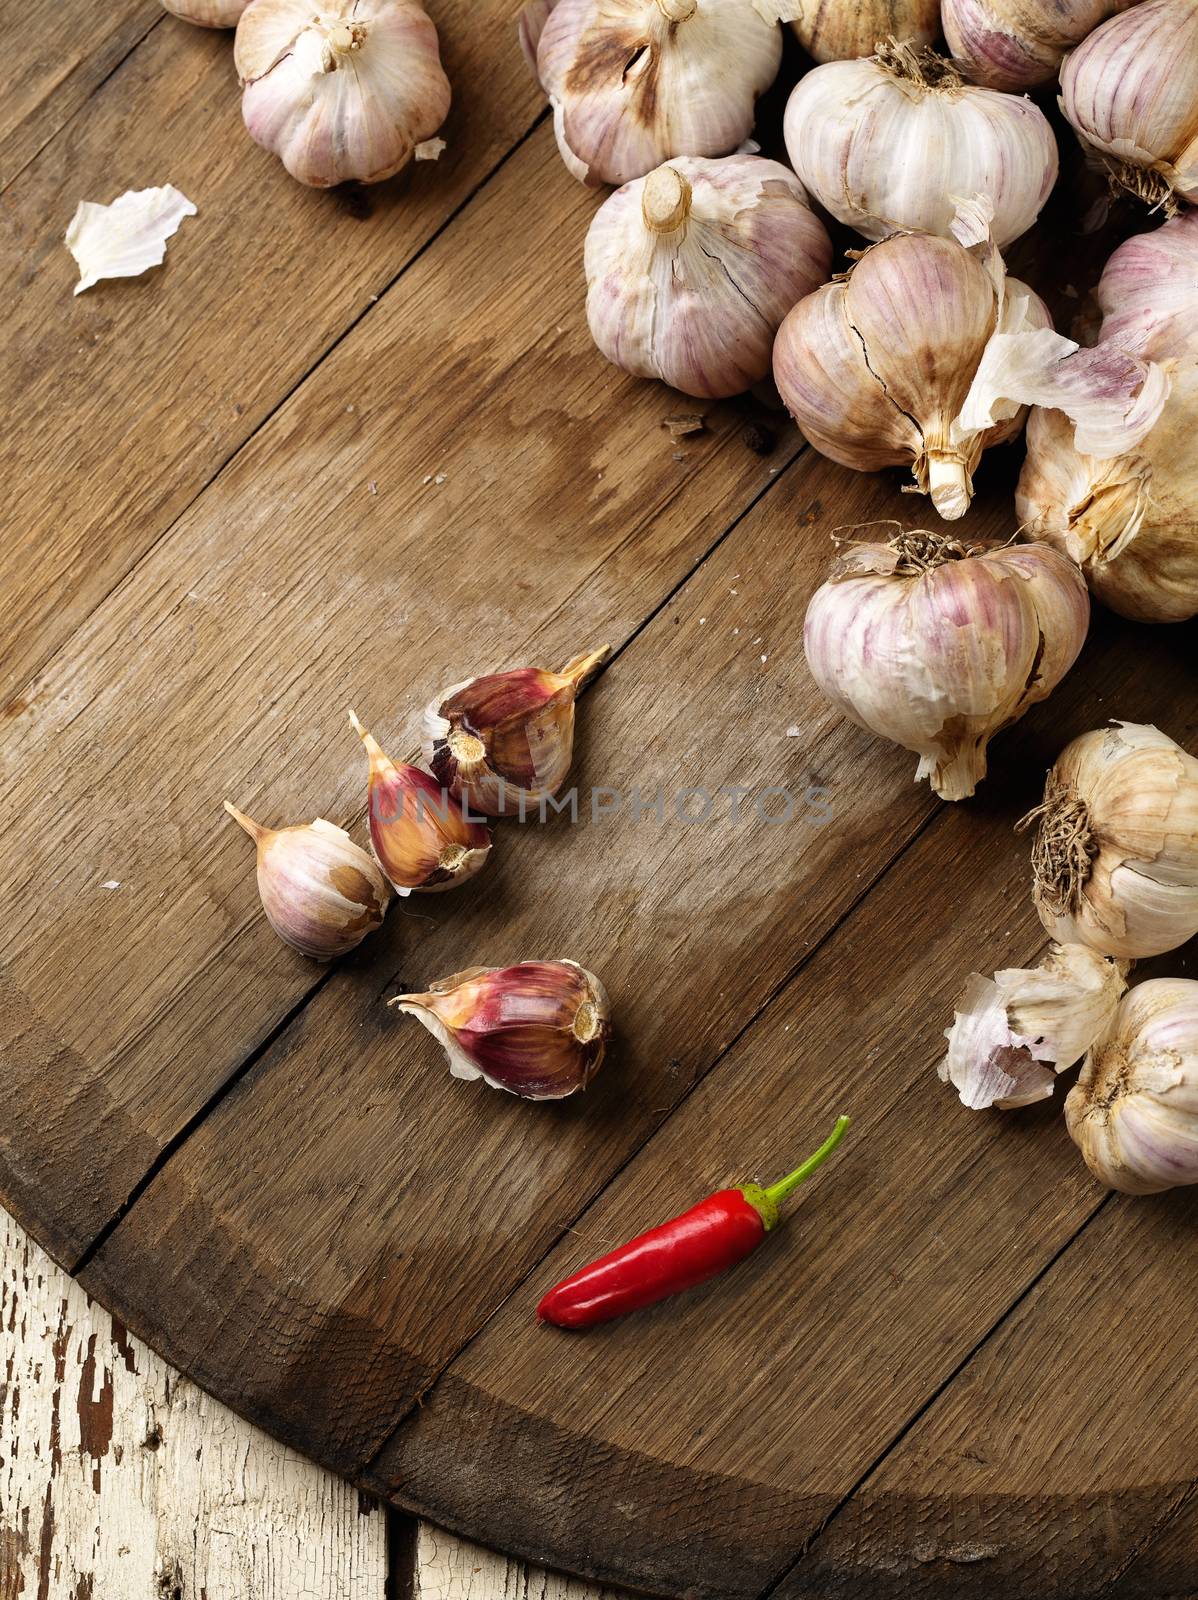 Garlic and pepper by agg